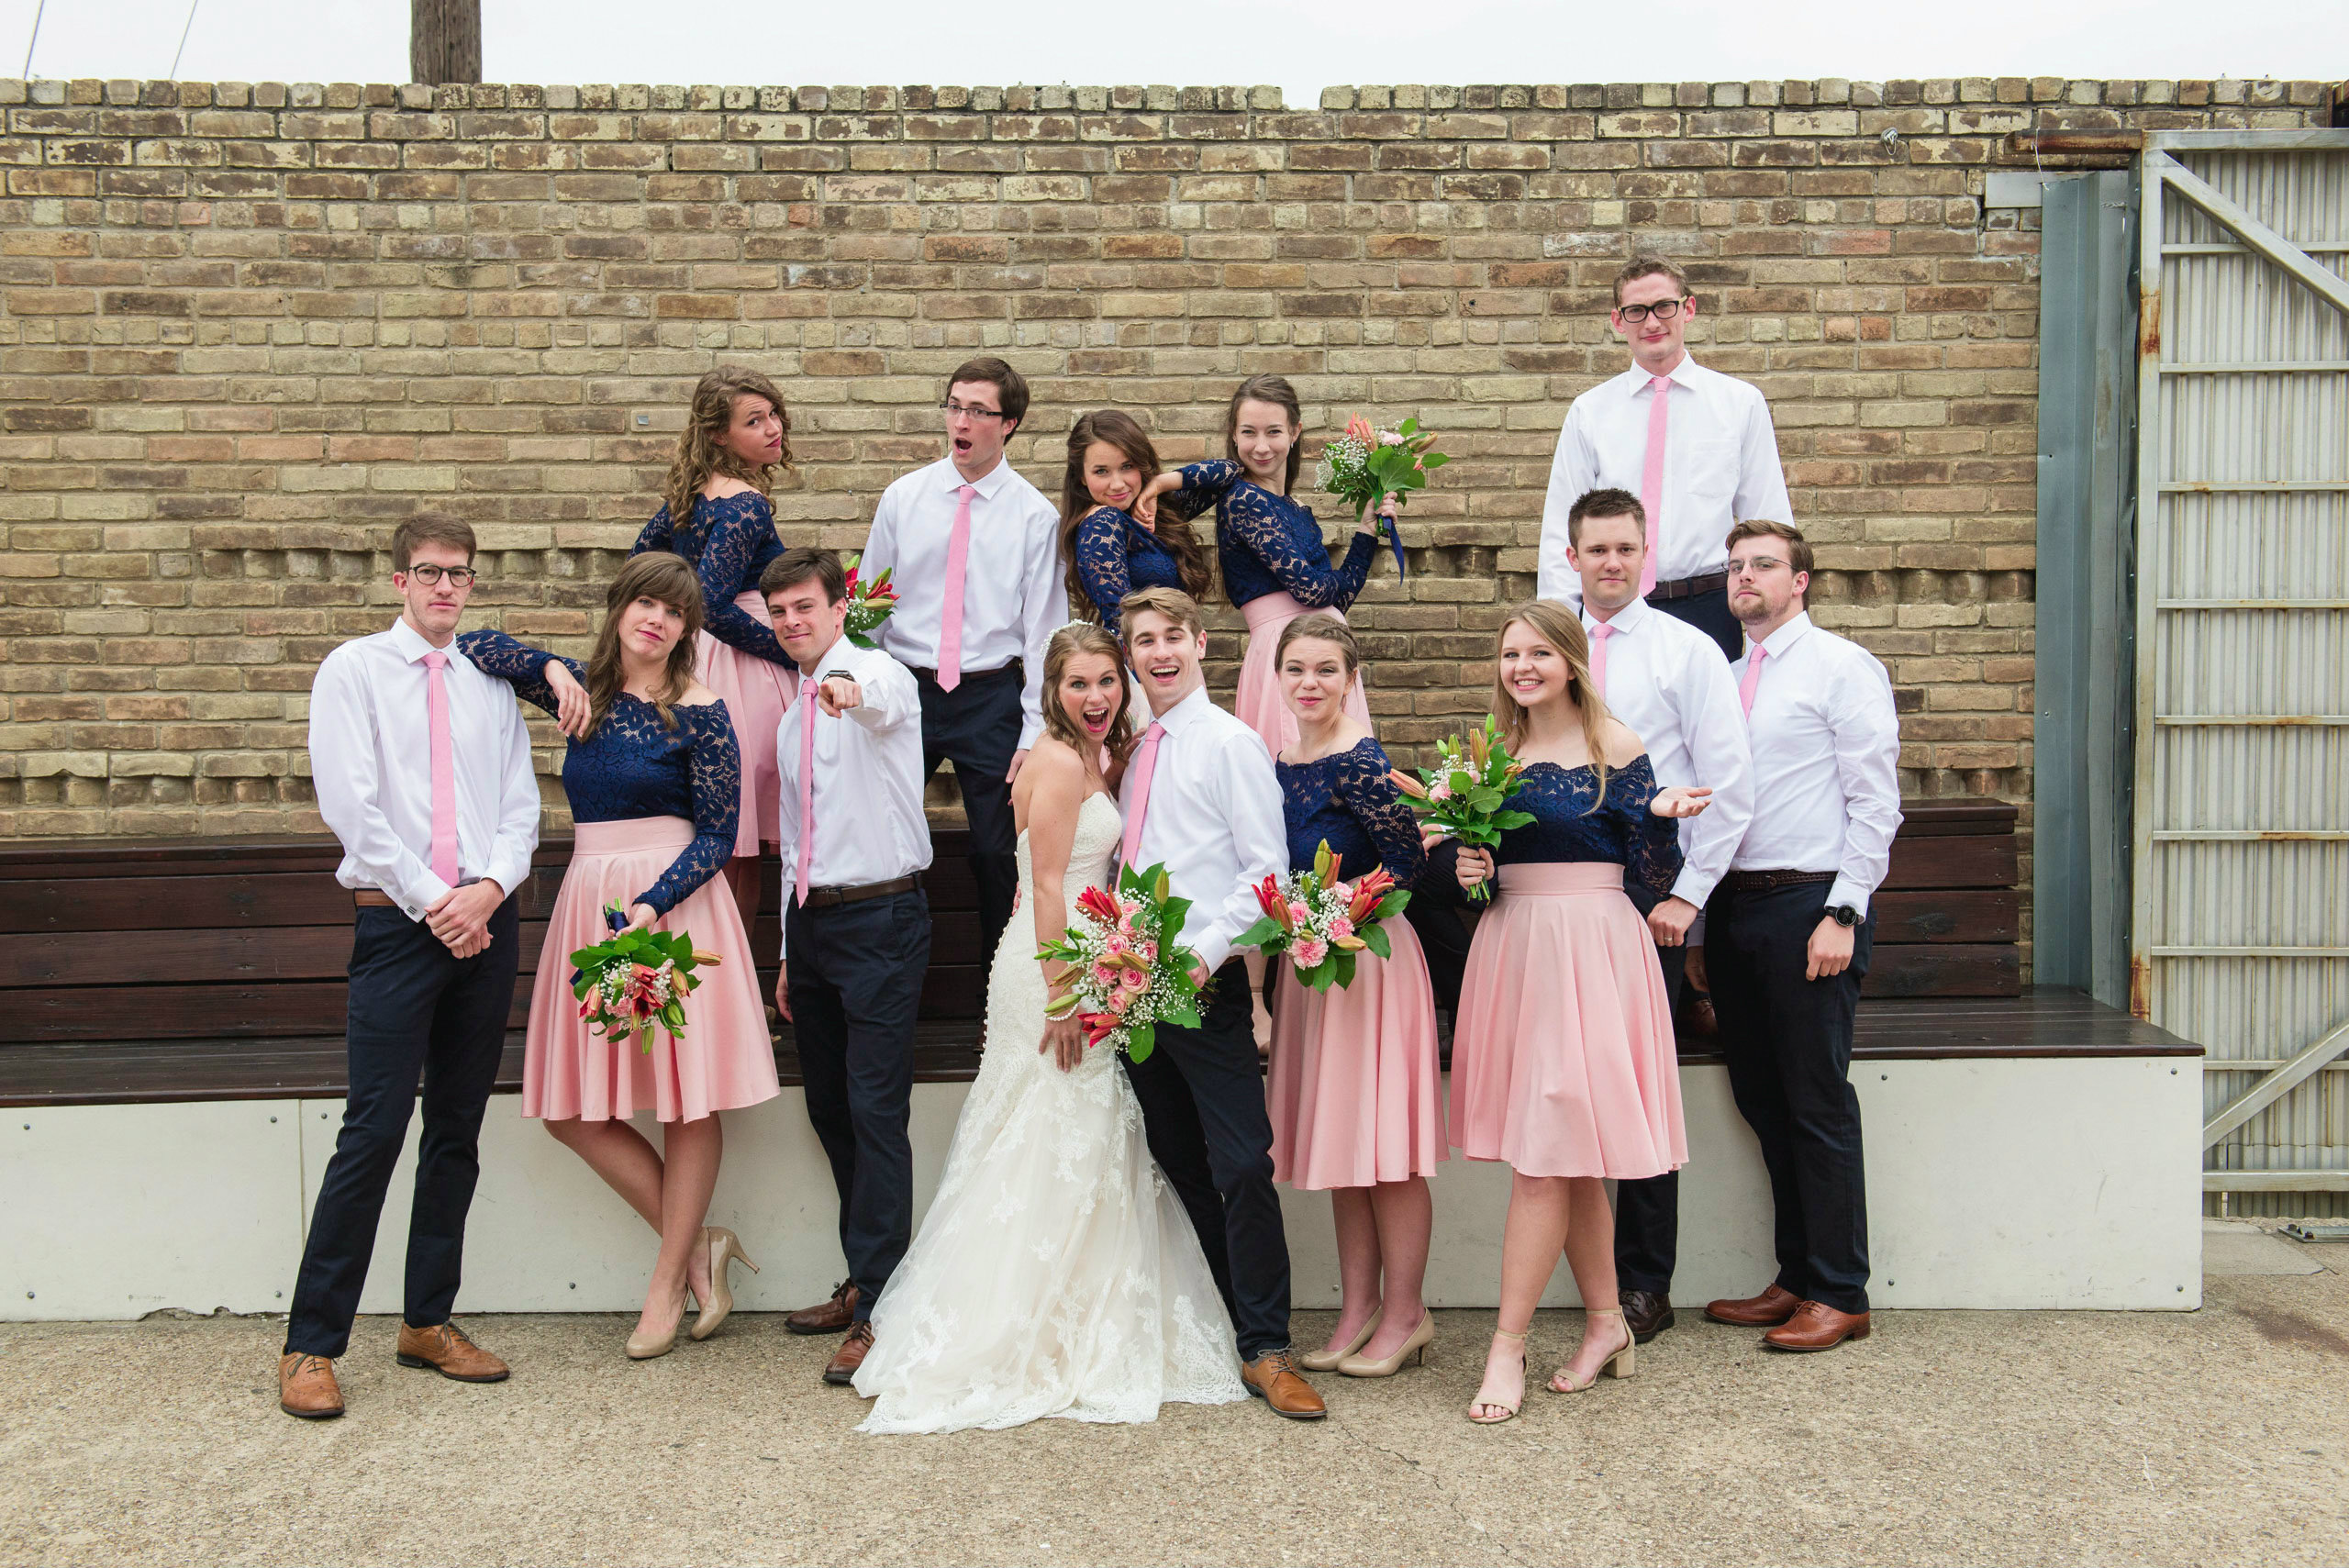 Quirky bridal party